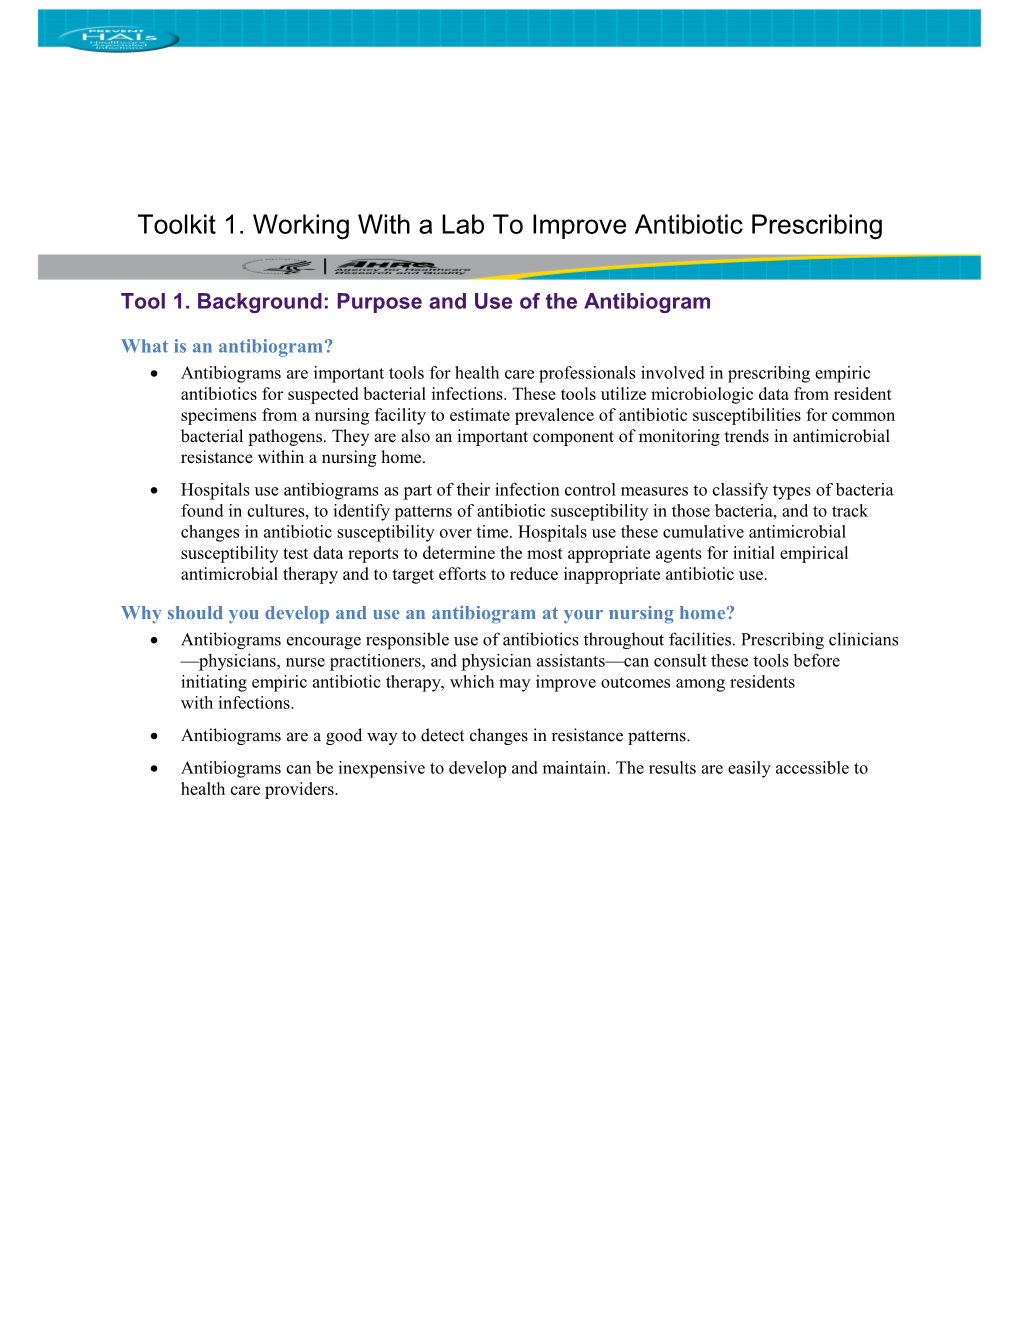 Tool 1.Background: Purpose and Use of the Antibiogram